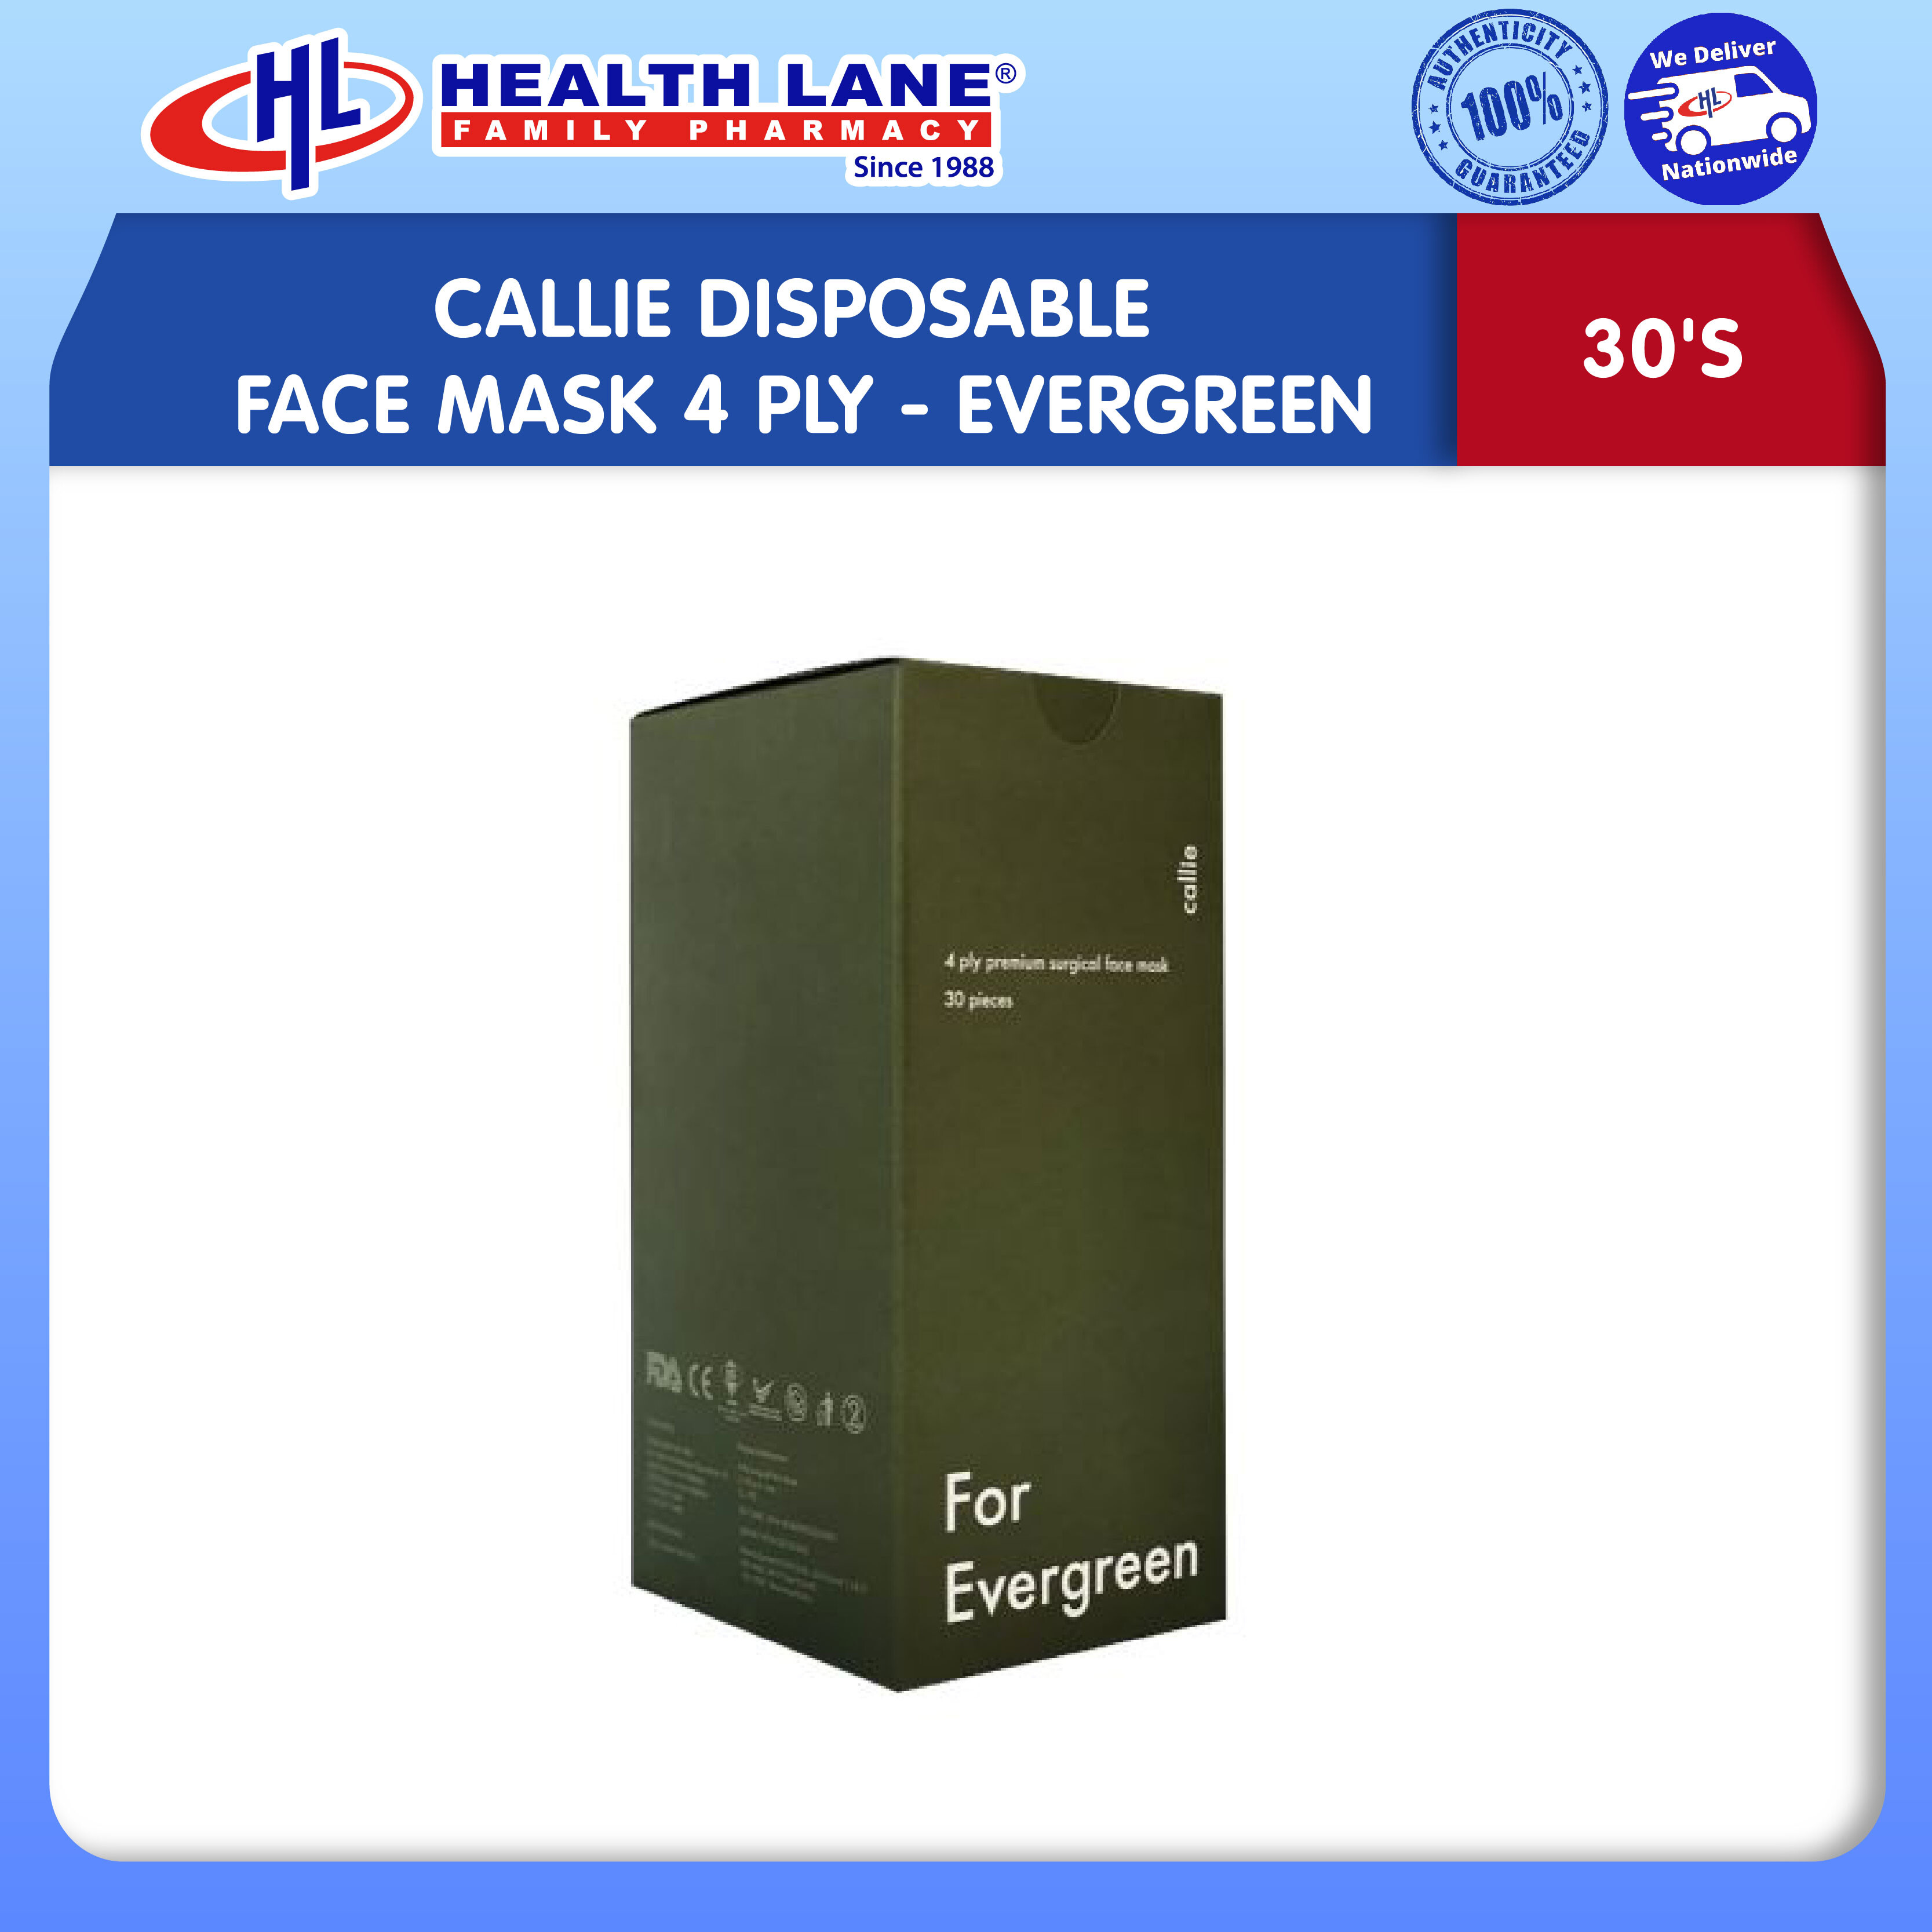 CALLIE DISPOSABLE FACE MASK 4 PLY 30'S- EVERGREEN